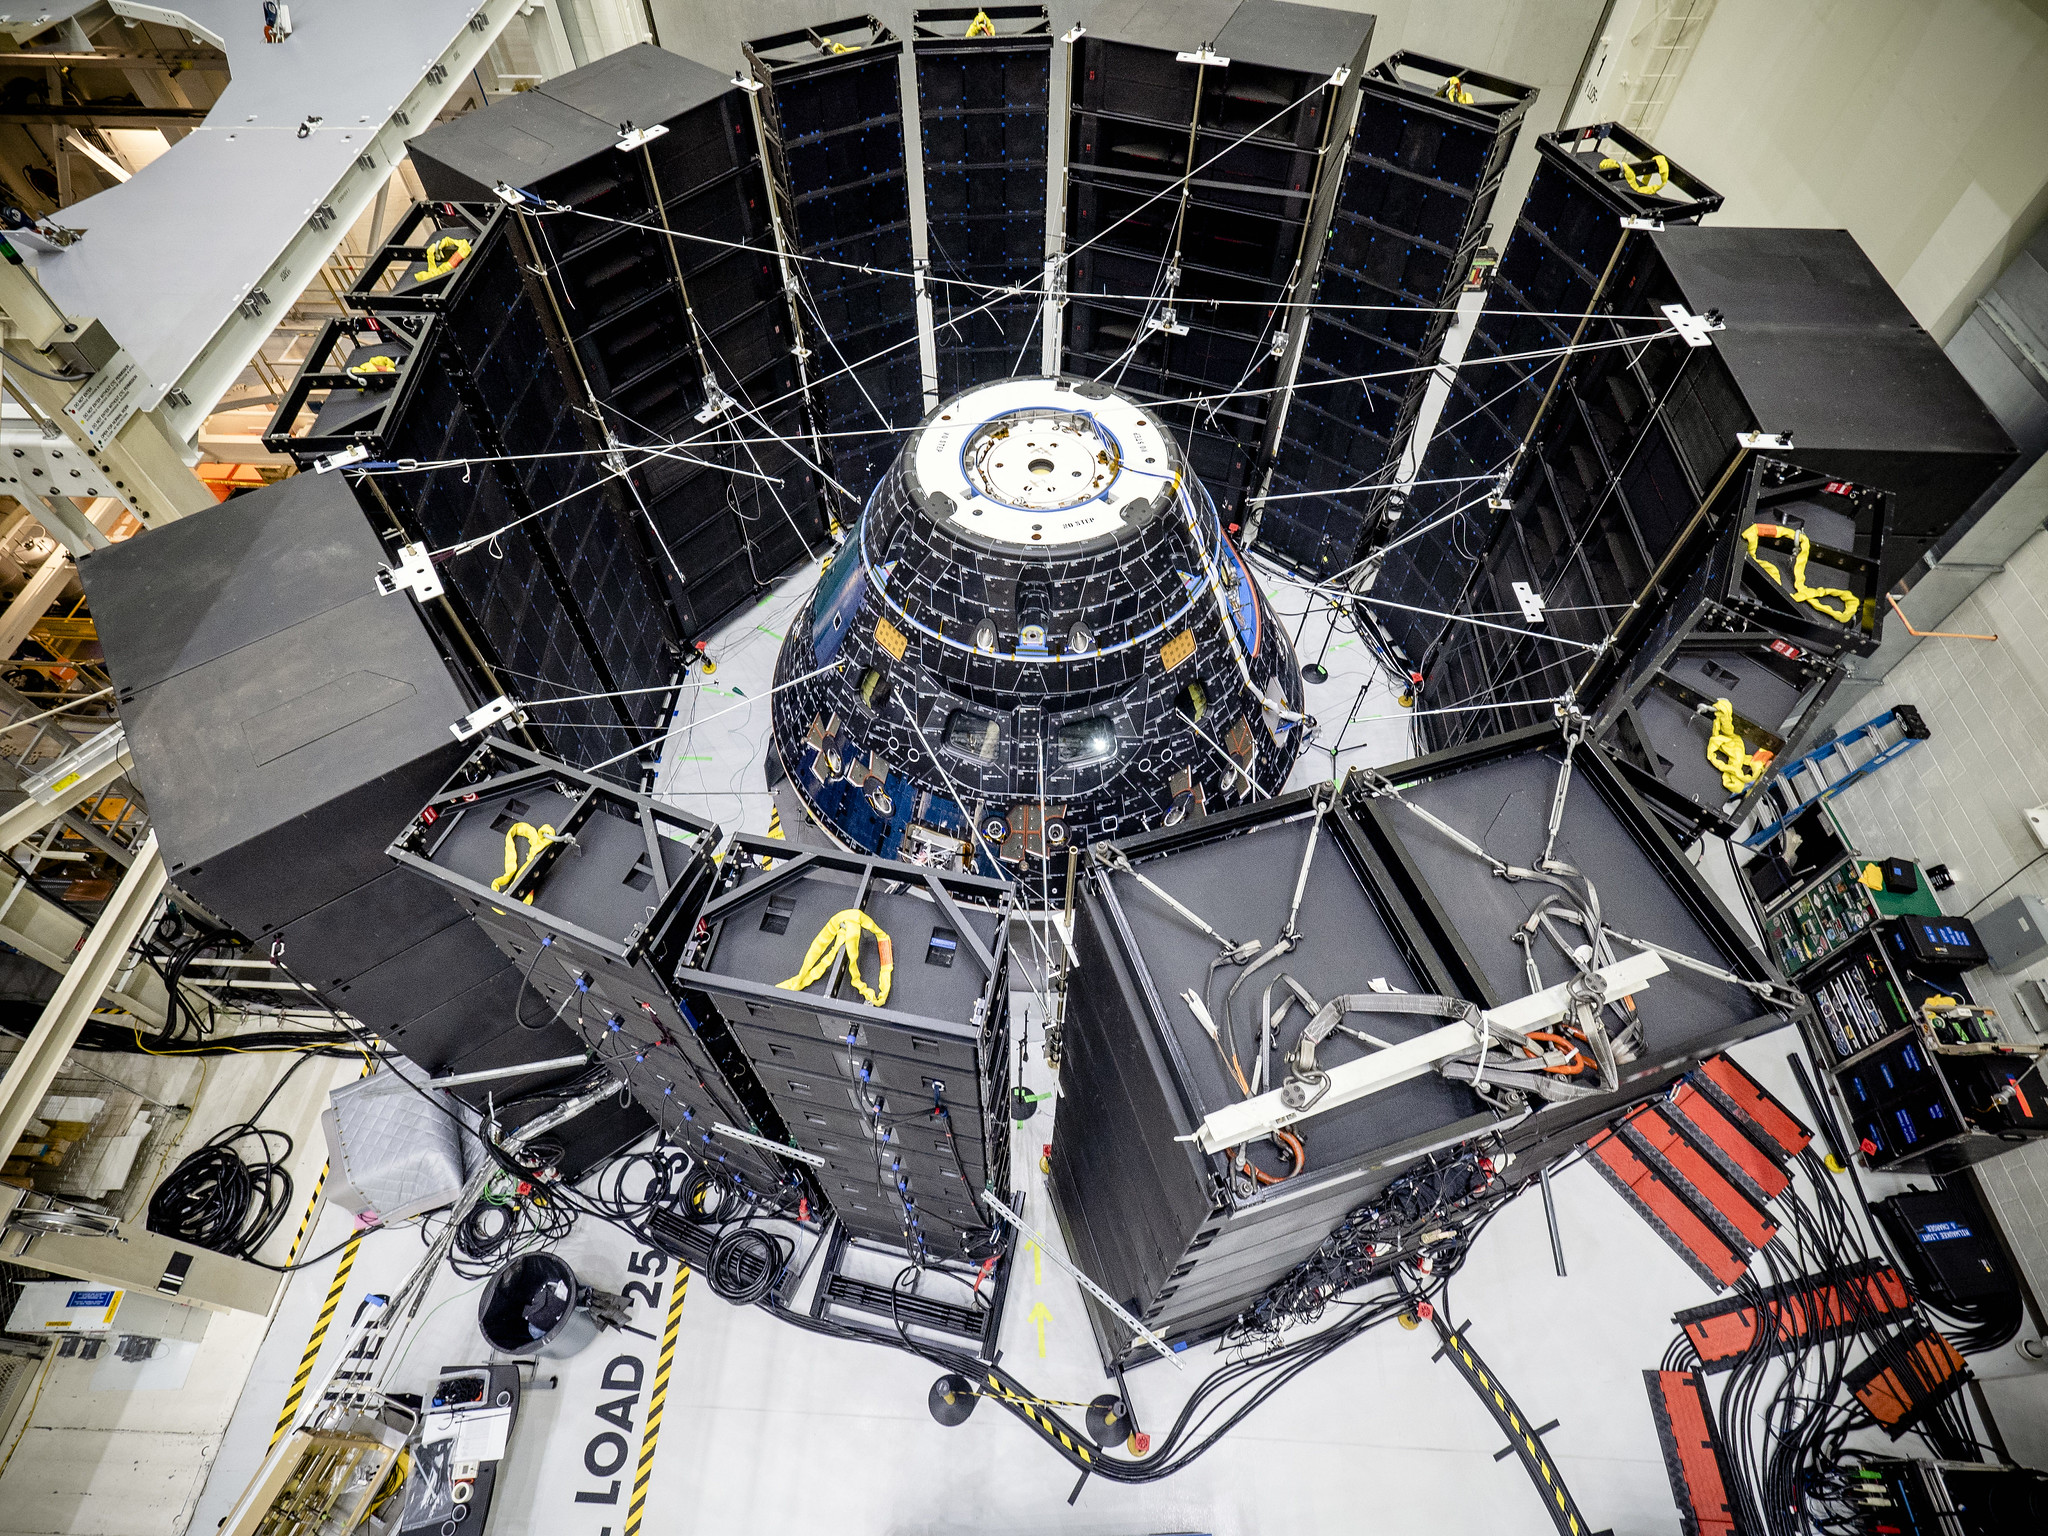 Sound Check: Orion Blasted with Sound for Acoustics Tests 